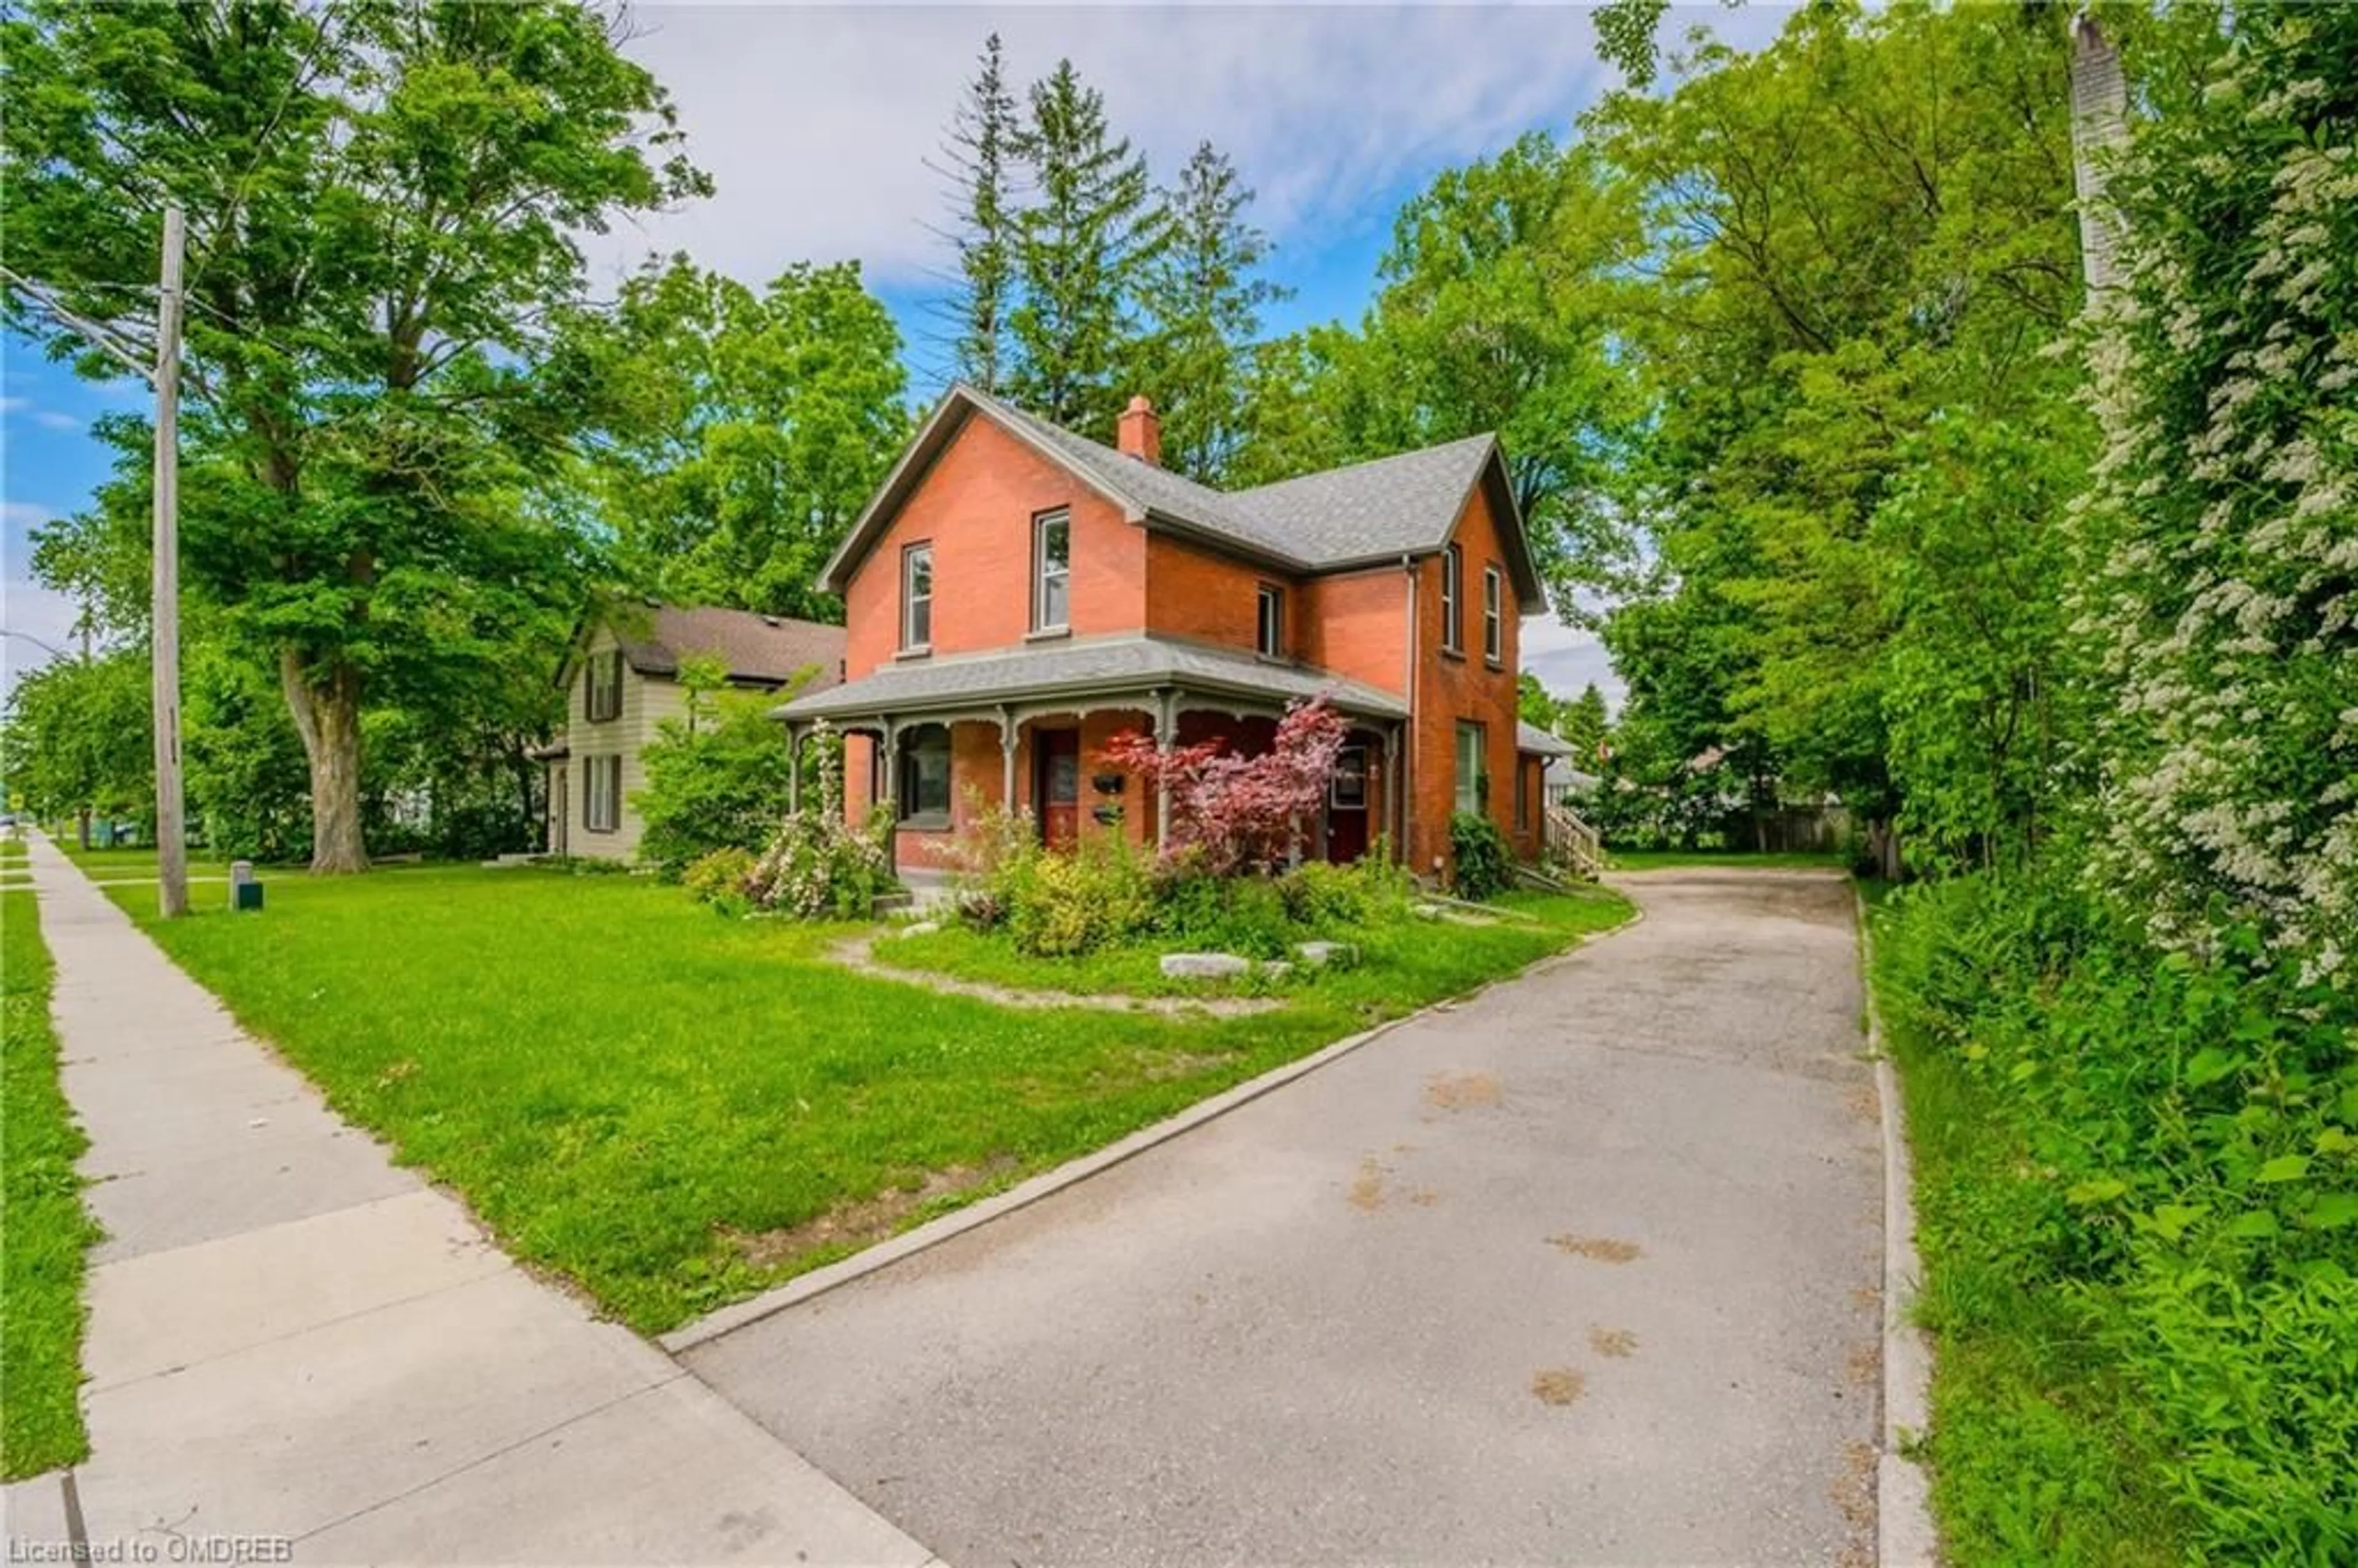 Cottage for 112 Concession St, Cambridge Ontario N1R 2H3